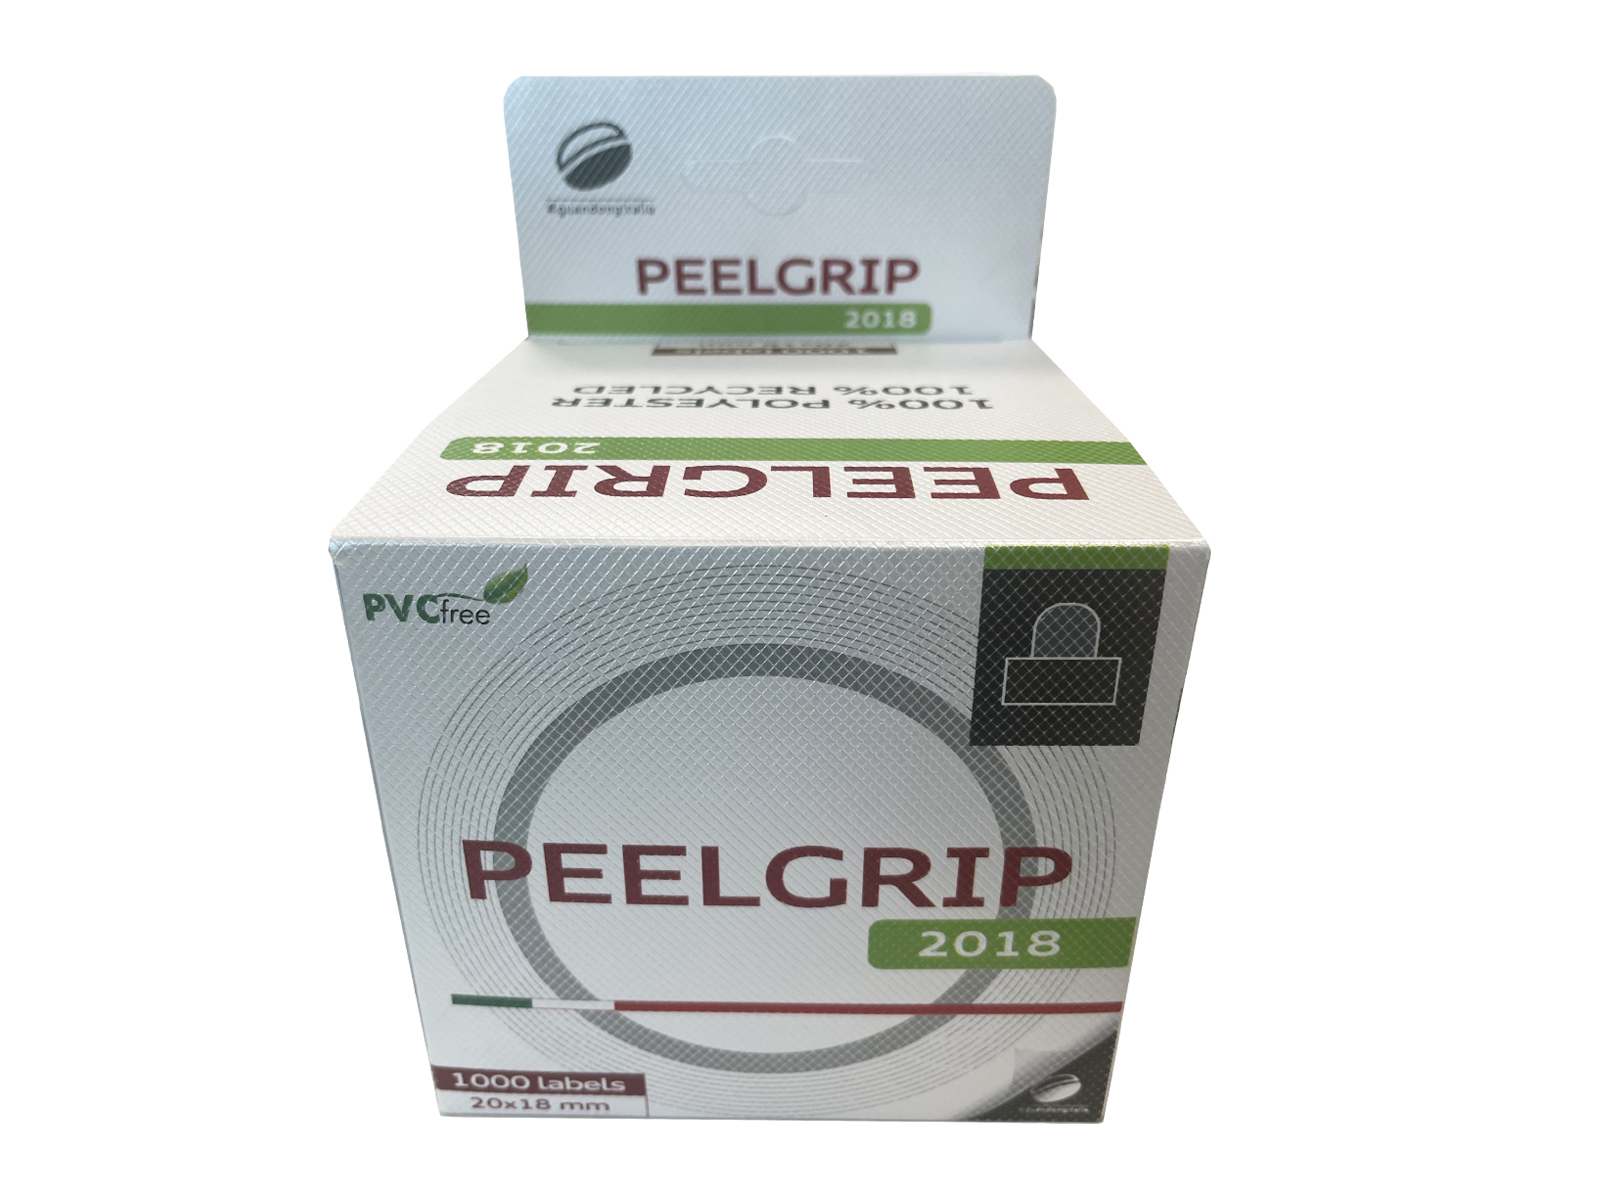 PEELGRIP-2018 adhesive tabs for removal of protective liners